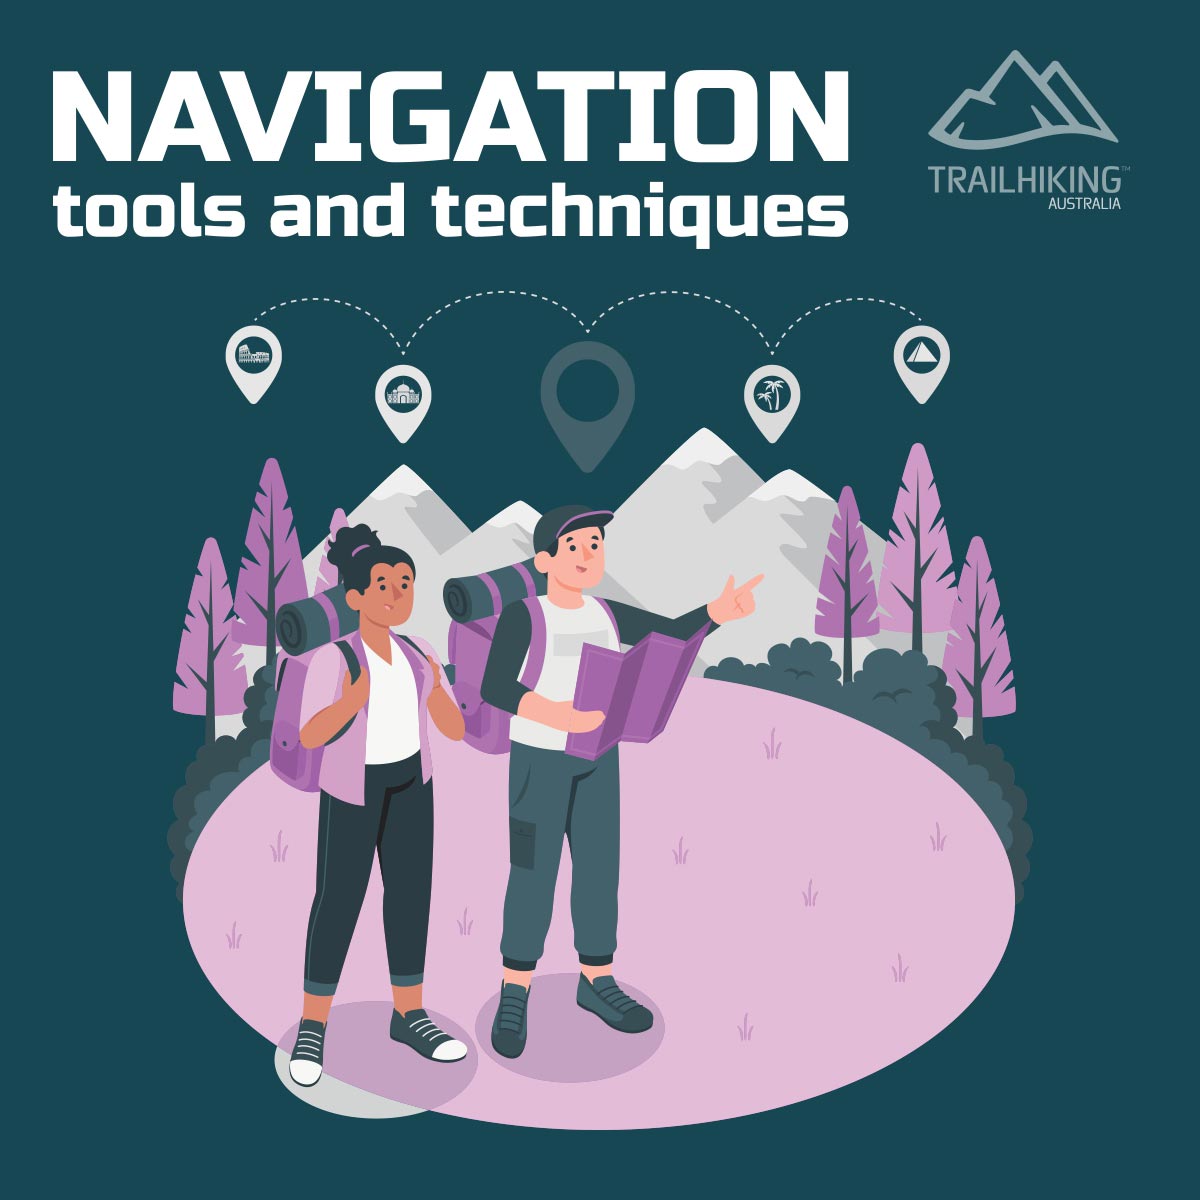 Hike navigation tools and techniques